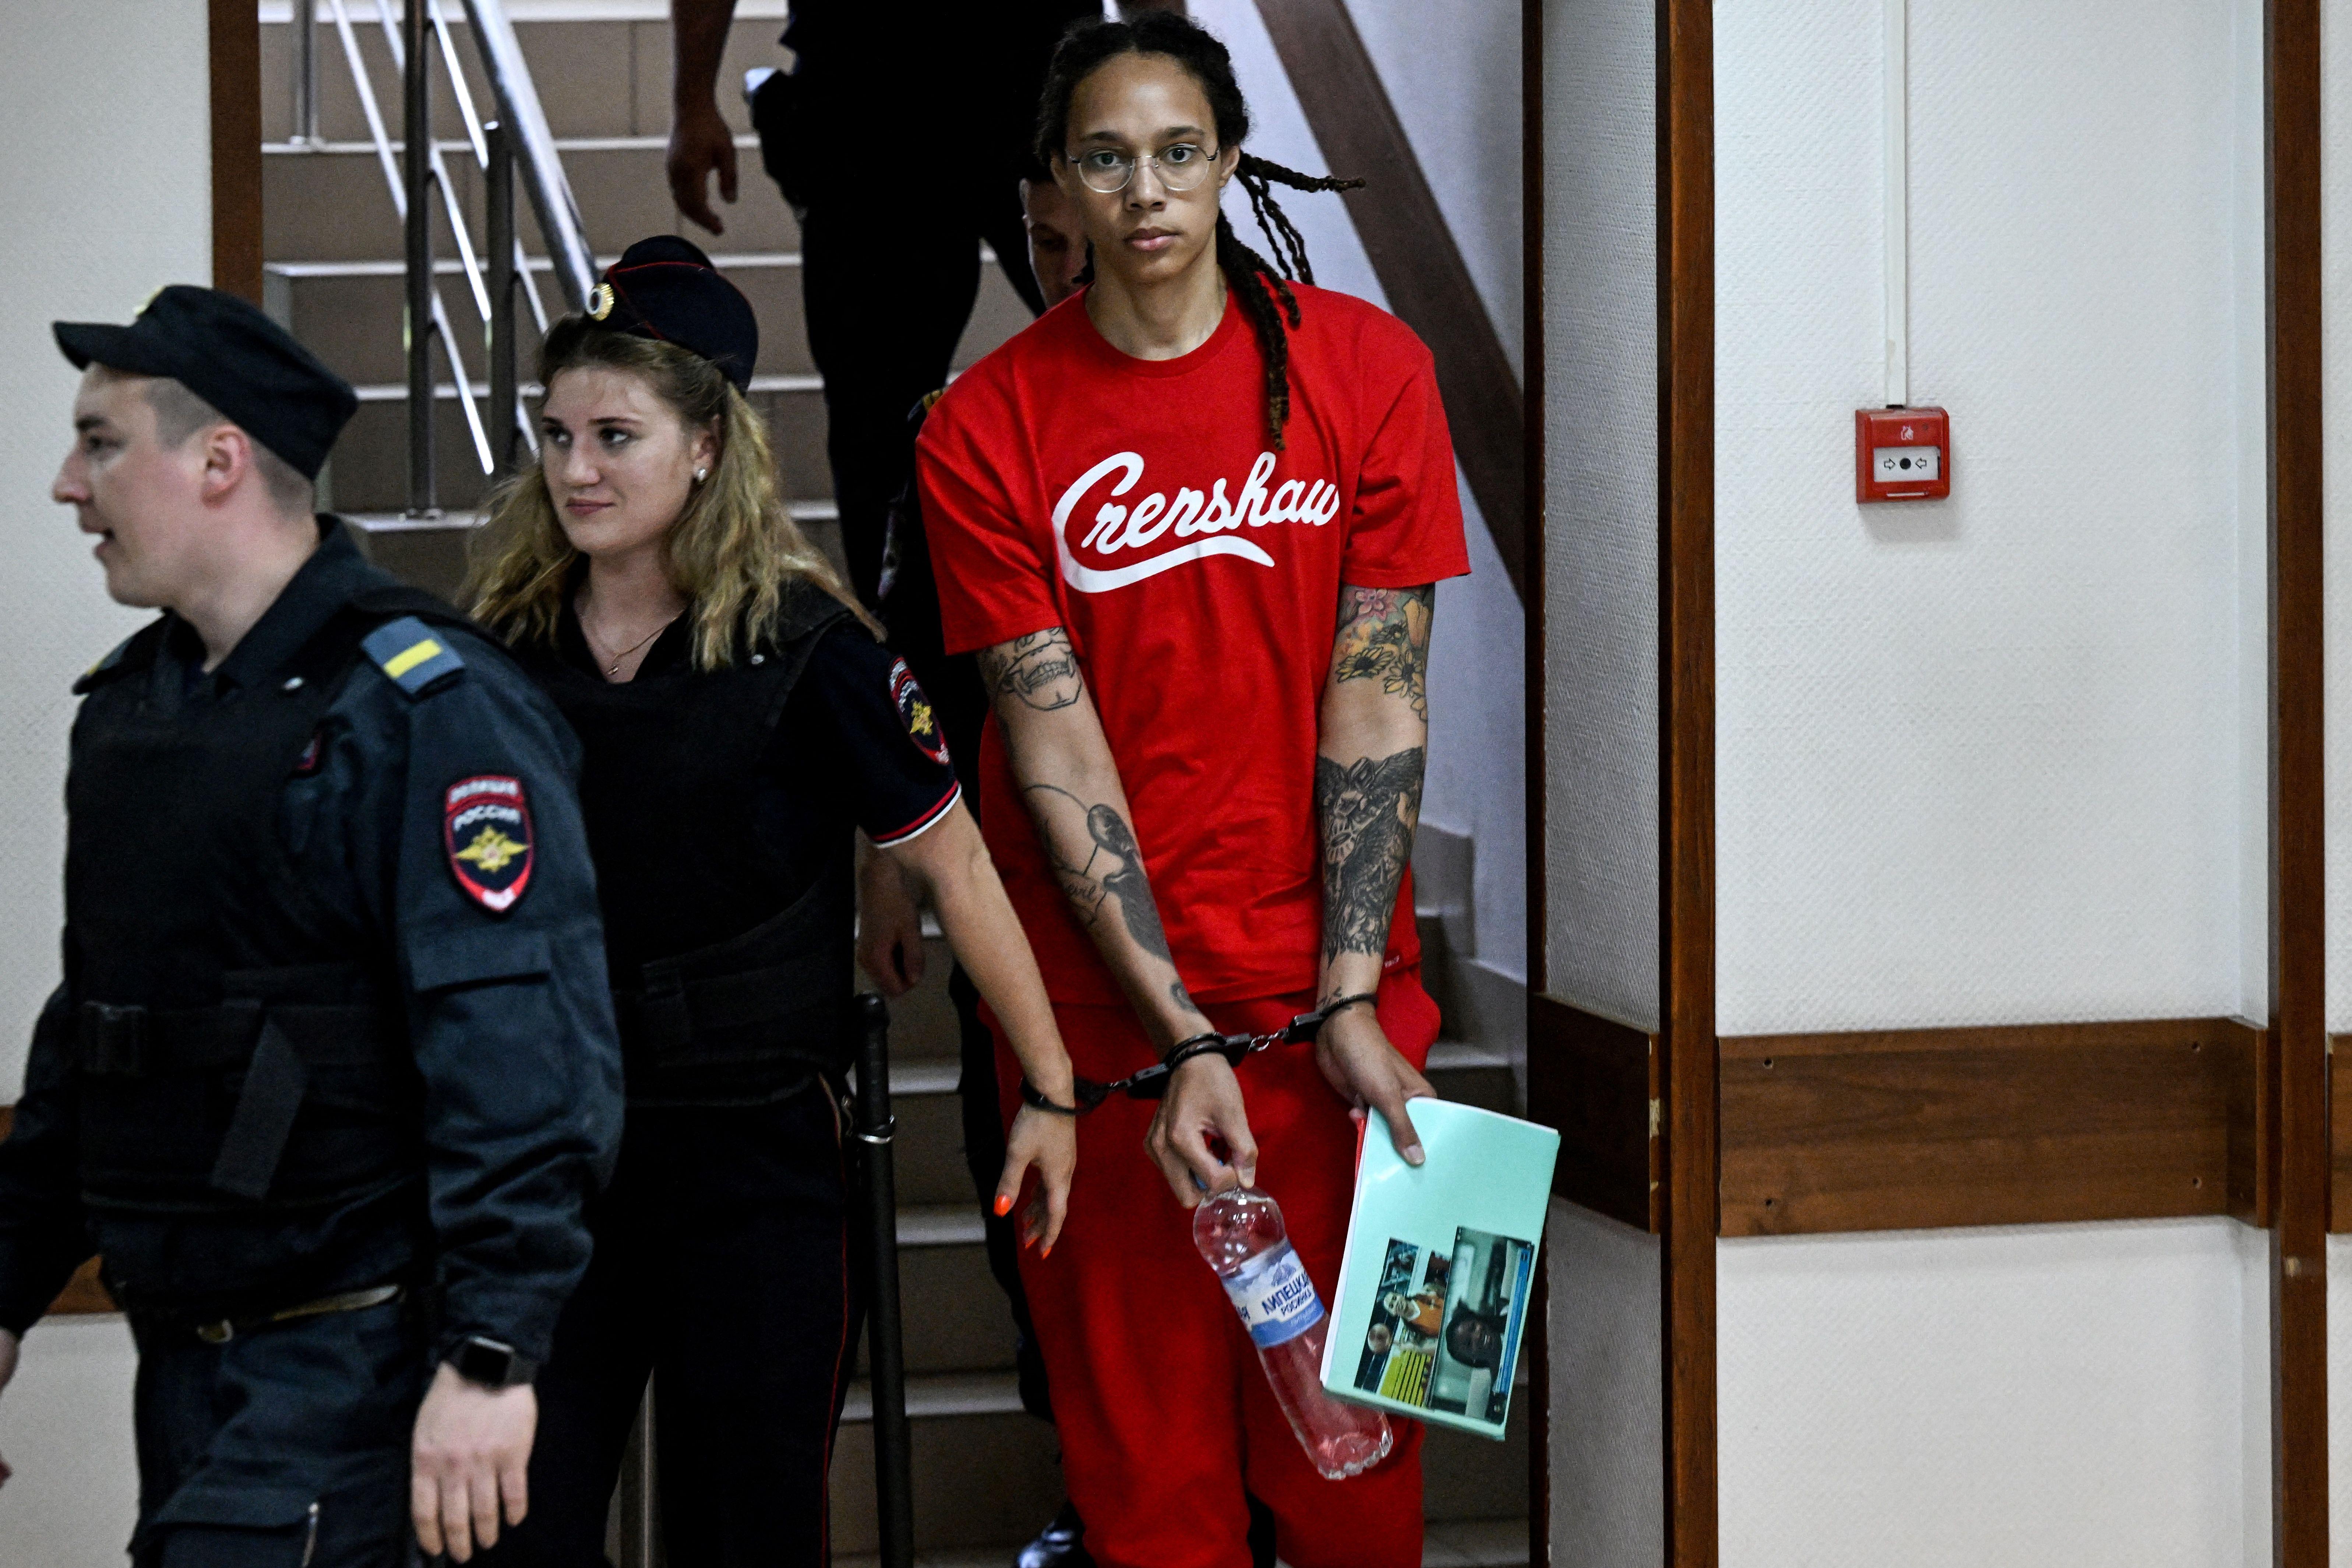 Griner is seen in a "Crenshaw" tee-shirt and handcuffs.